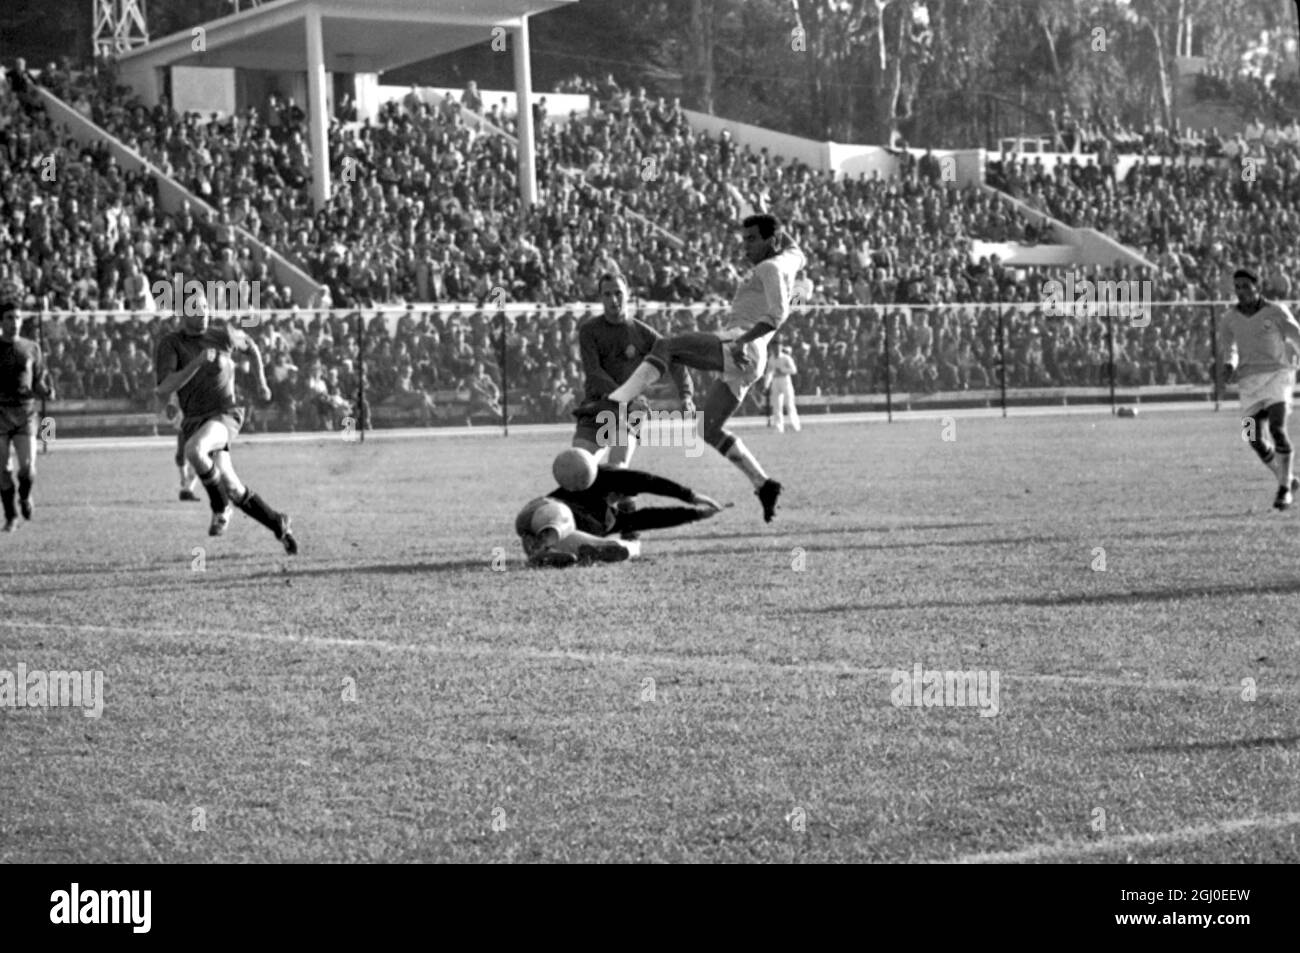 1962 World Cup Brazil v Spain Brazil's Izidio Netto Vava (right) leaps to avoid crashing into a grounded Spanish goalkeeper Jose Araquistain, during a Brazil attack on the Spanish goal during their World Cup play-off. 9th June 1962. Stock Photo